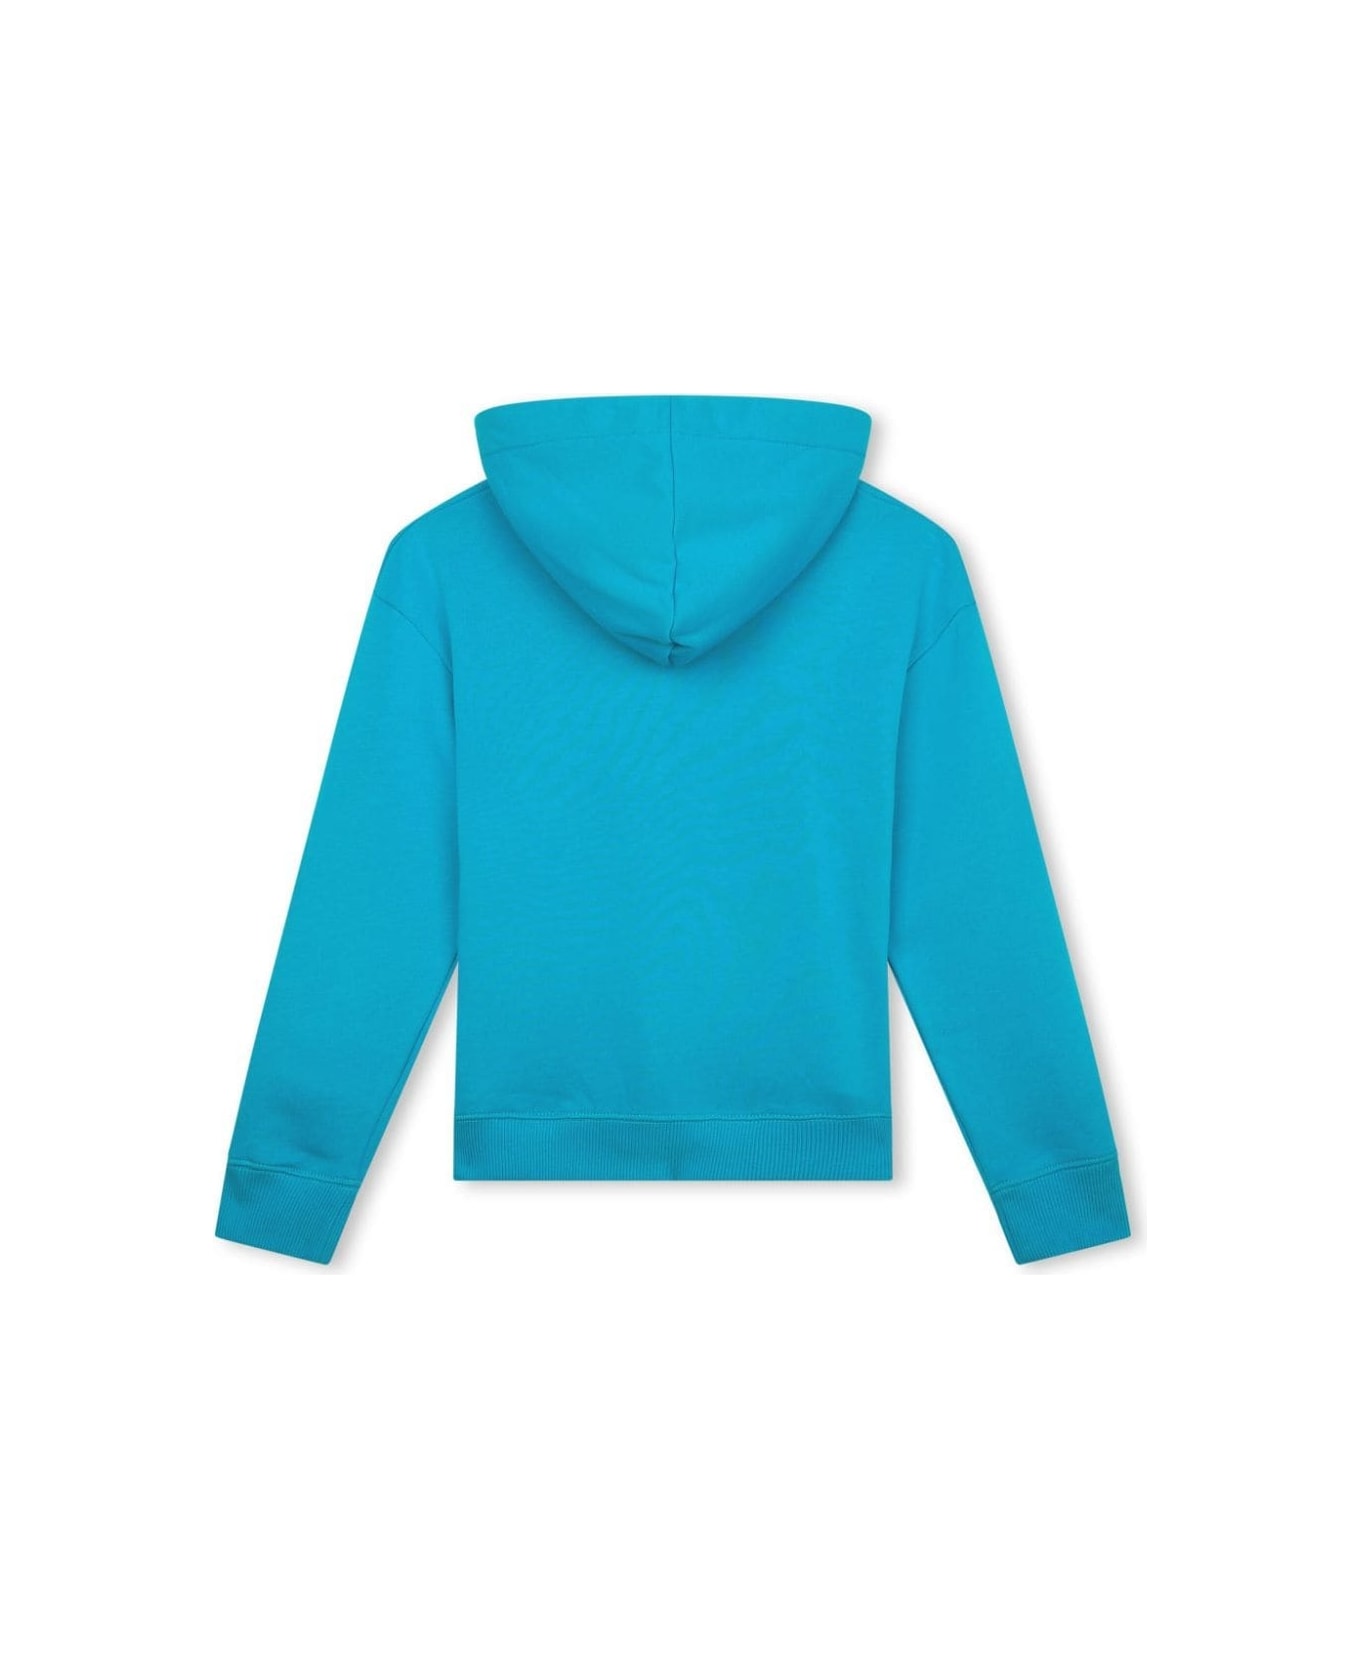 Lanvin Turquoise Hoodie With Logo And "curb" Motif - Blue ニットウェア＆スウェットシャツ